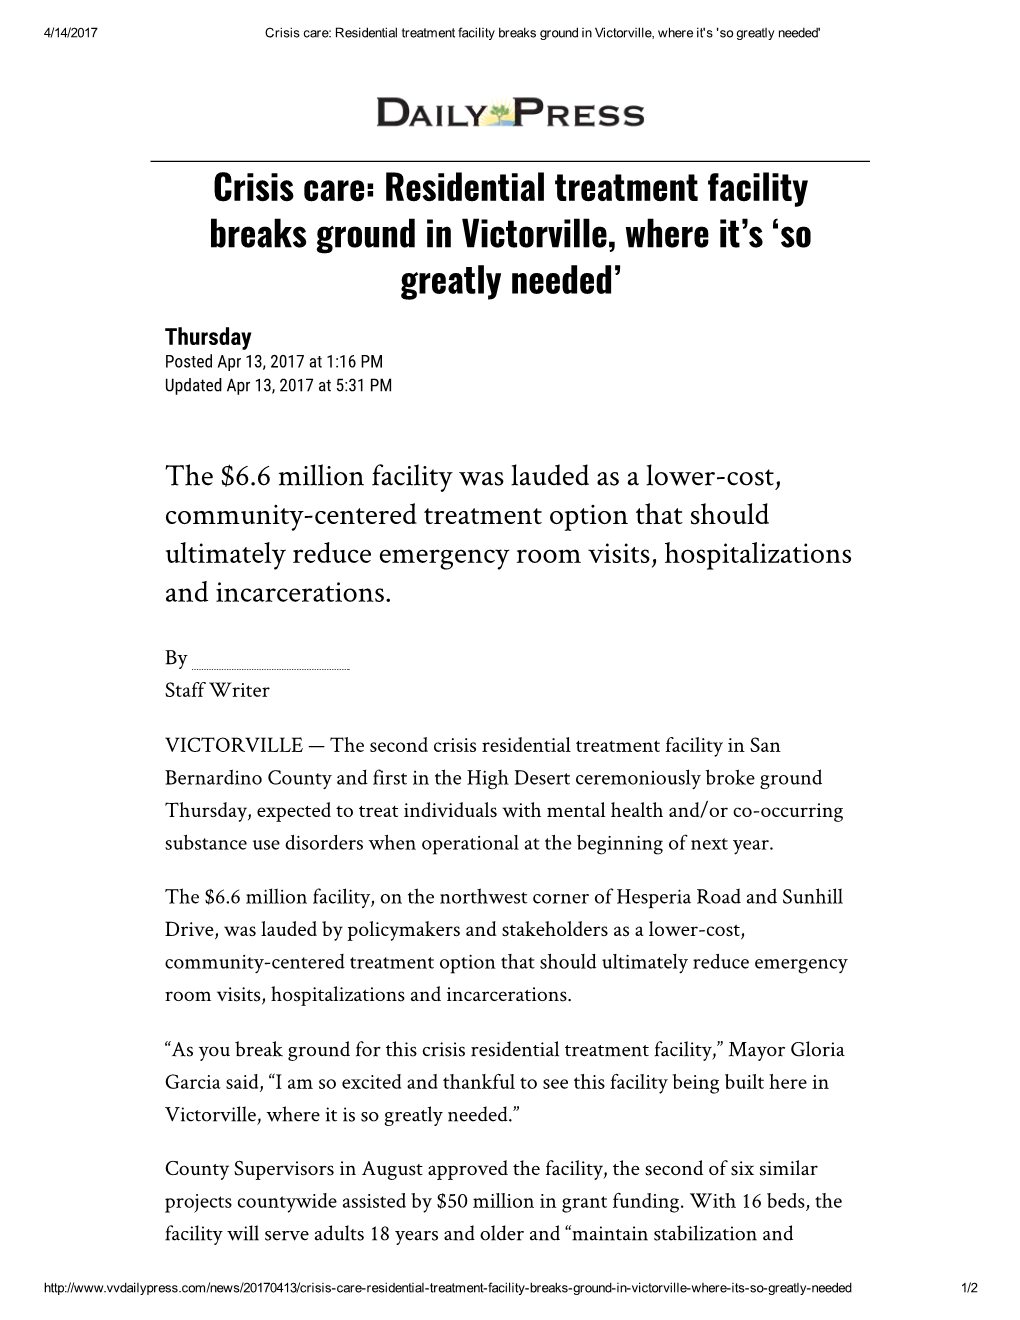 Crisis Care: Residential Treatment Facility Breaks Ground in Victorville, Where It's 'So Greatly Needed'